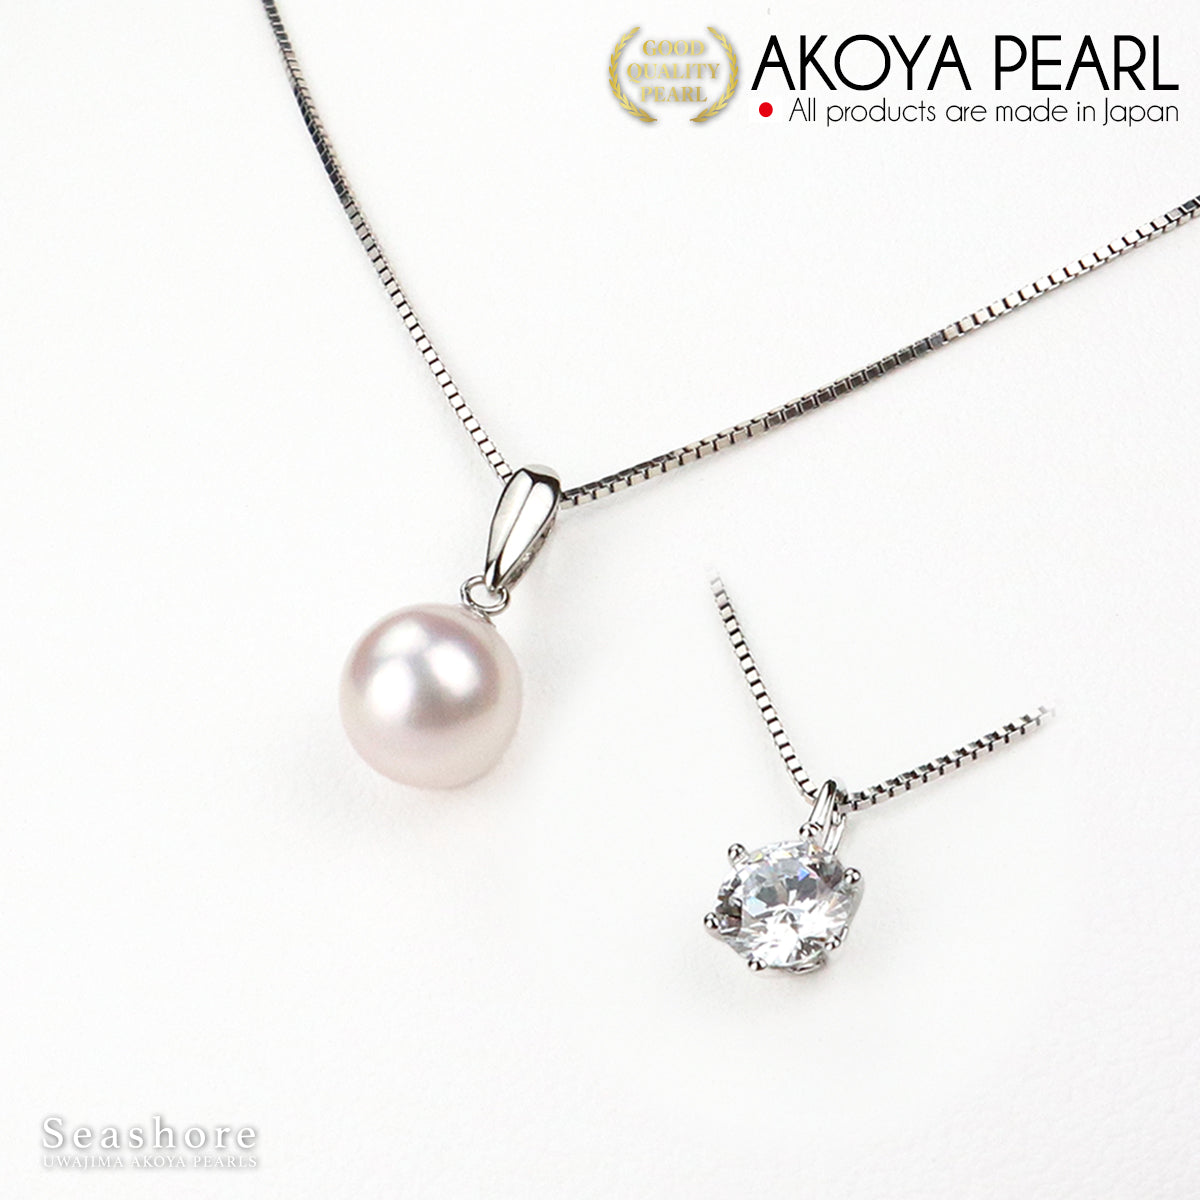 Flower beads &amp; Zirconia 1.2 carat 2WAY pearl pendant [8.0-8.5mm] SV925 Venetian chain with gray storage case and 3 star appraisal (3822)